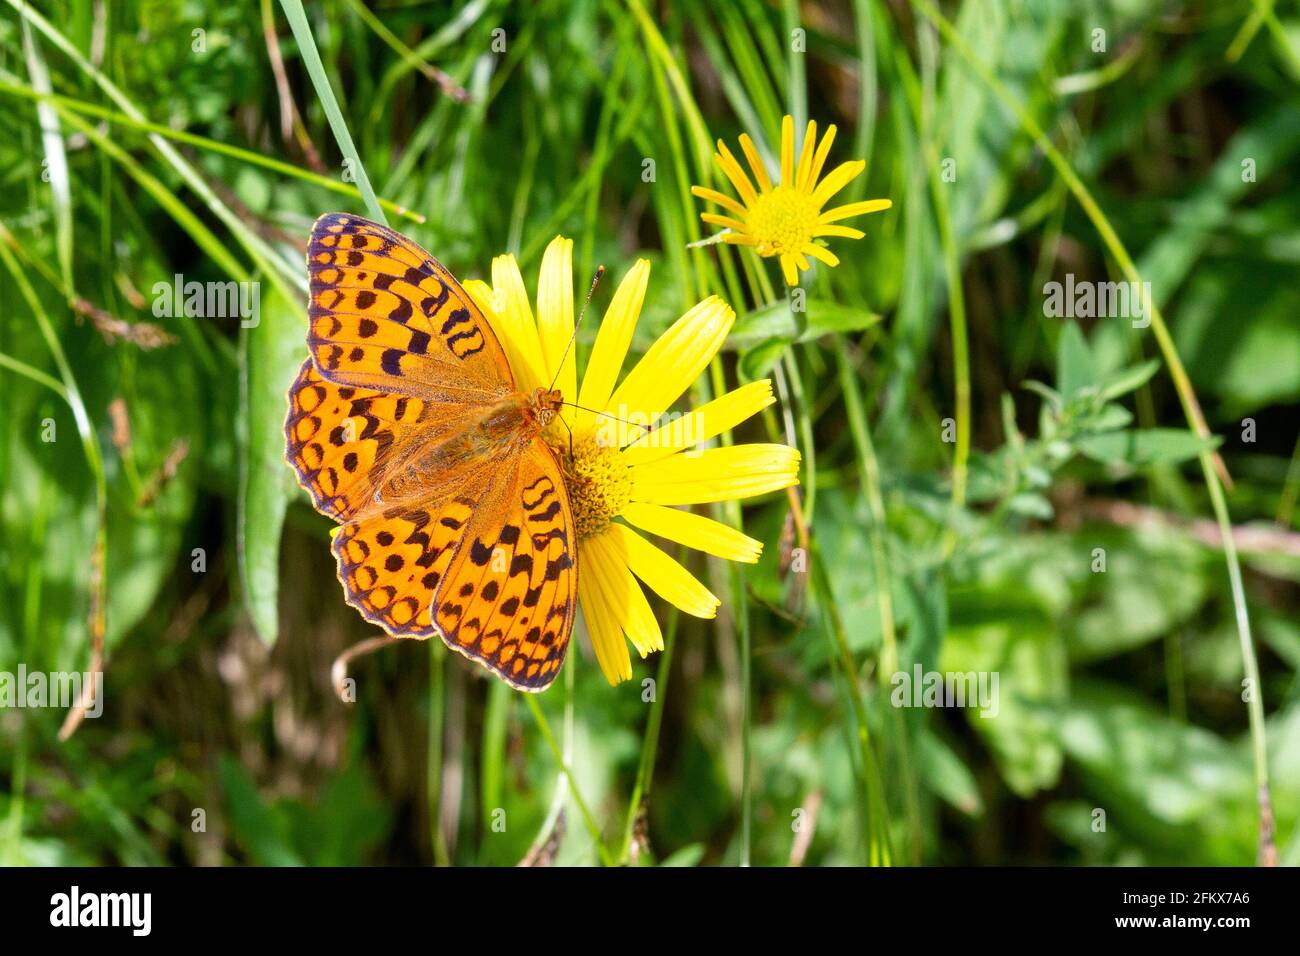 Imperial Coat, Argynnis Paphia, Butterfly Stock Photo